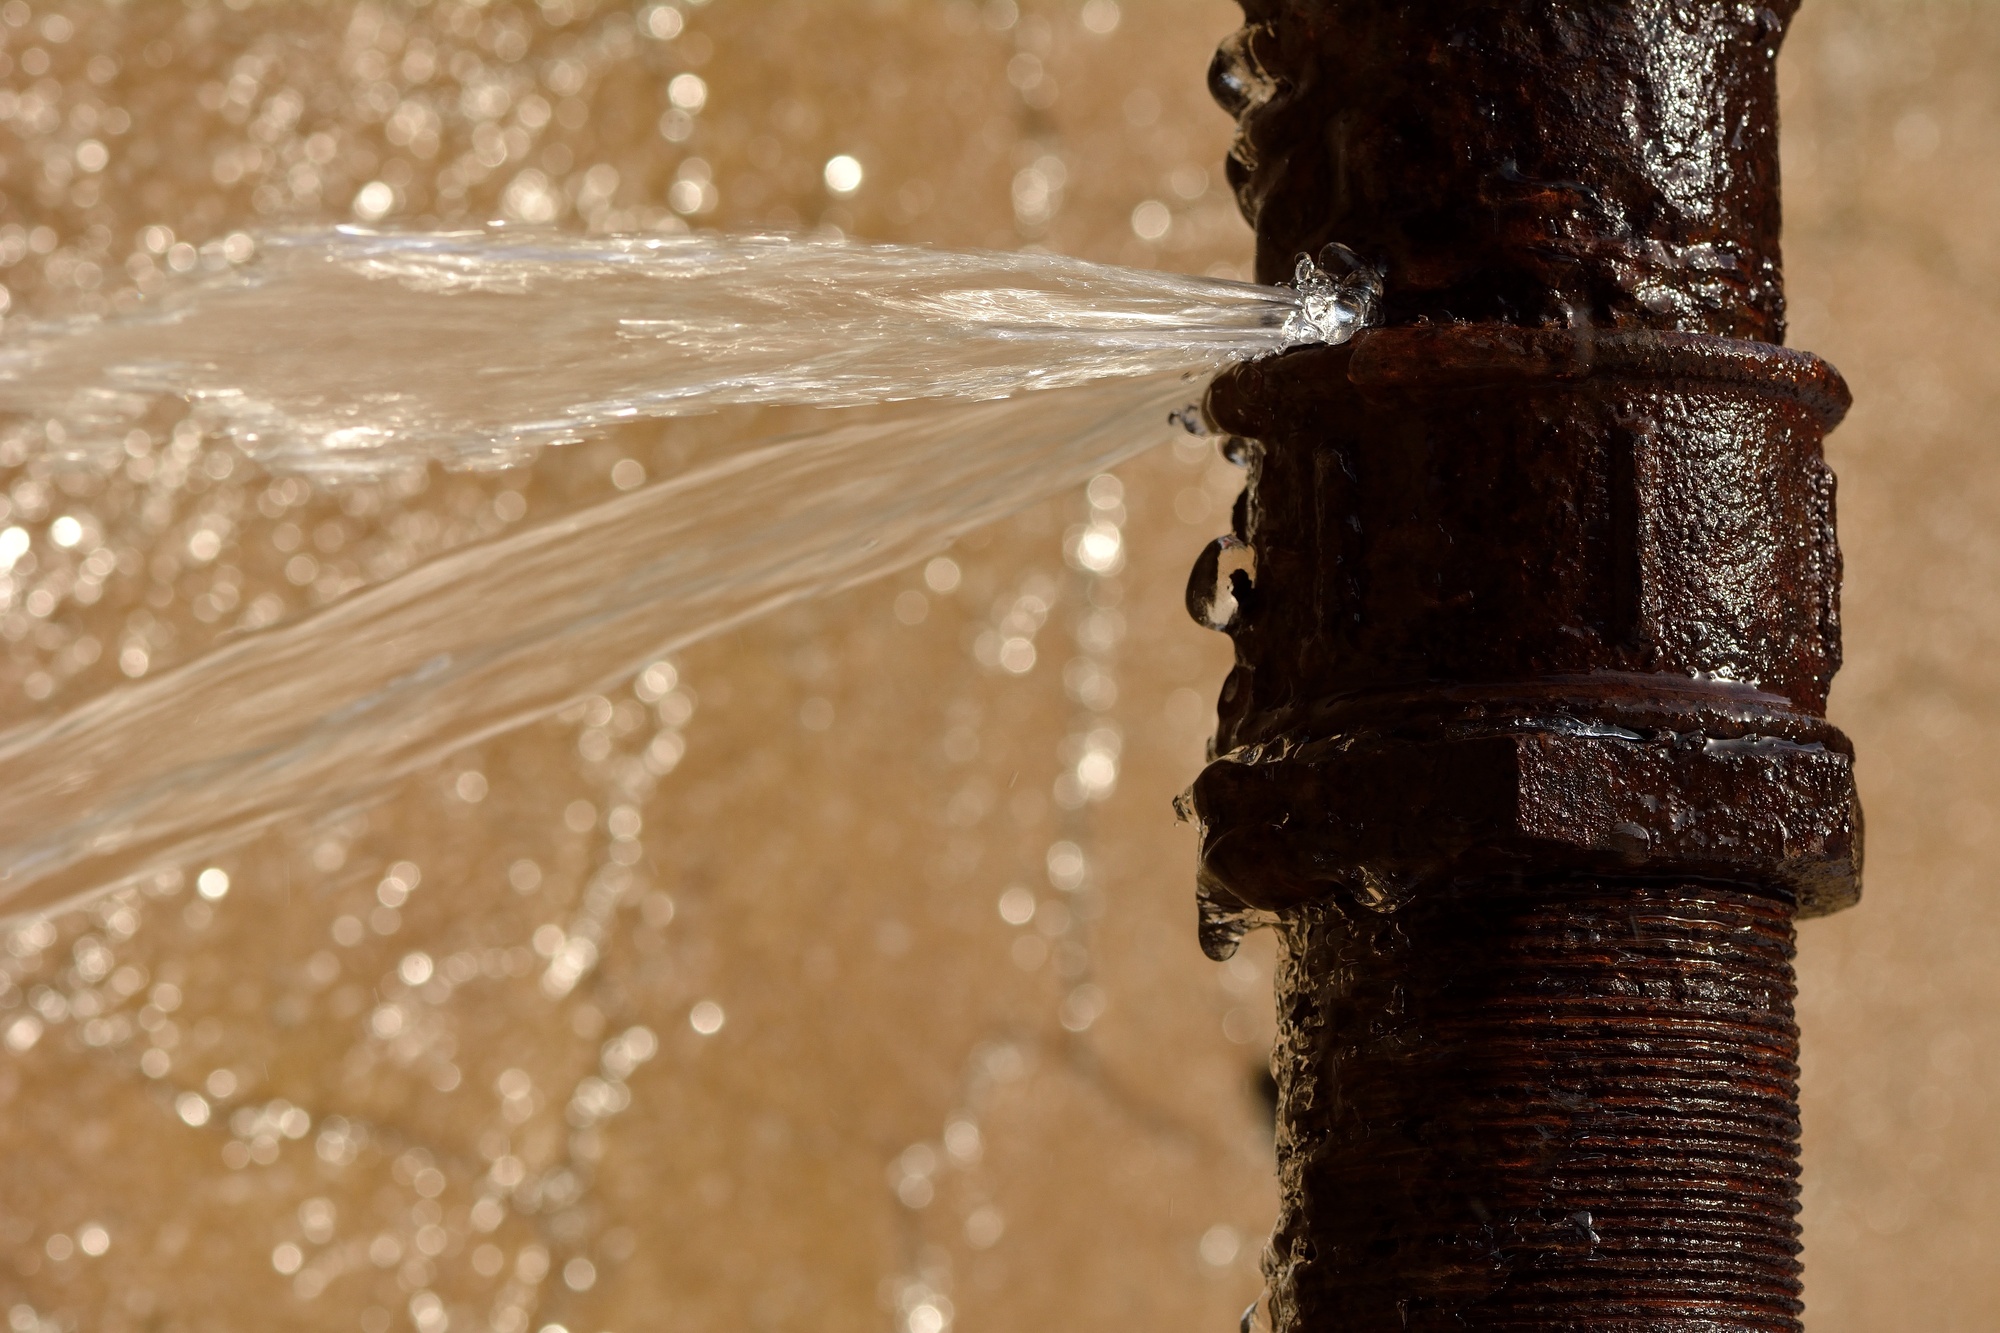 5 things to know if you have a burst pipe